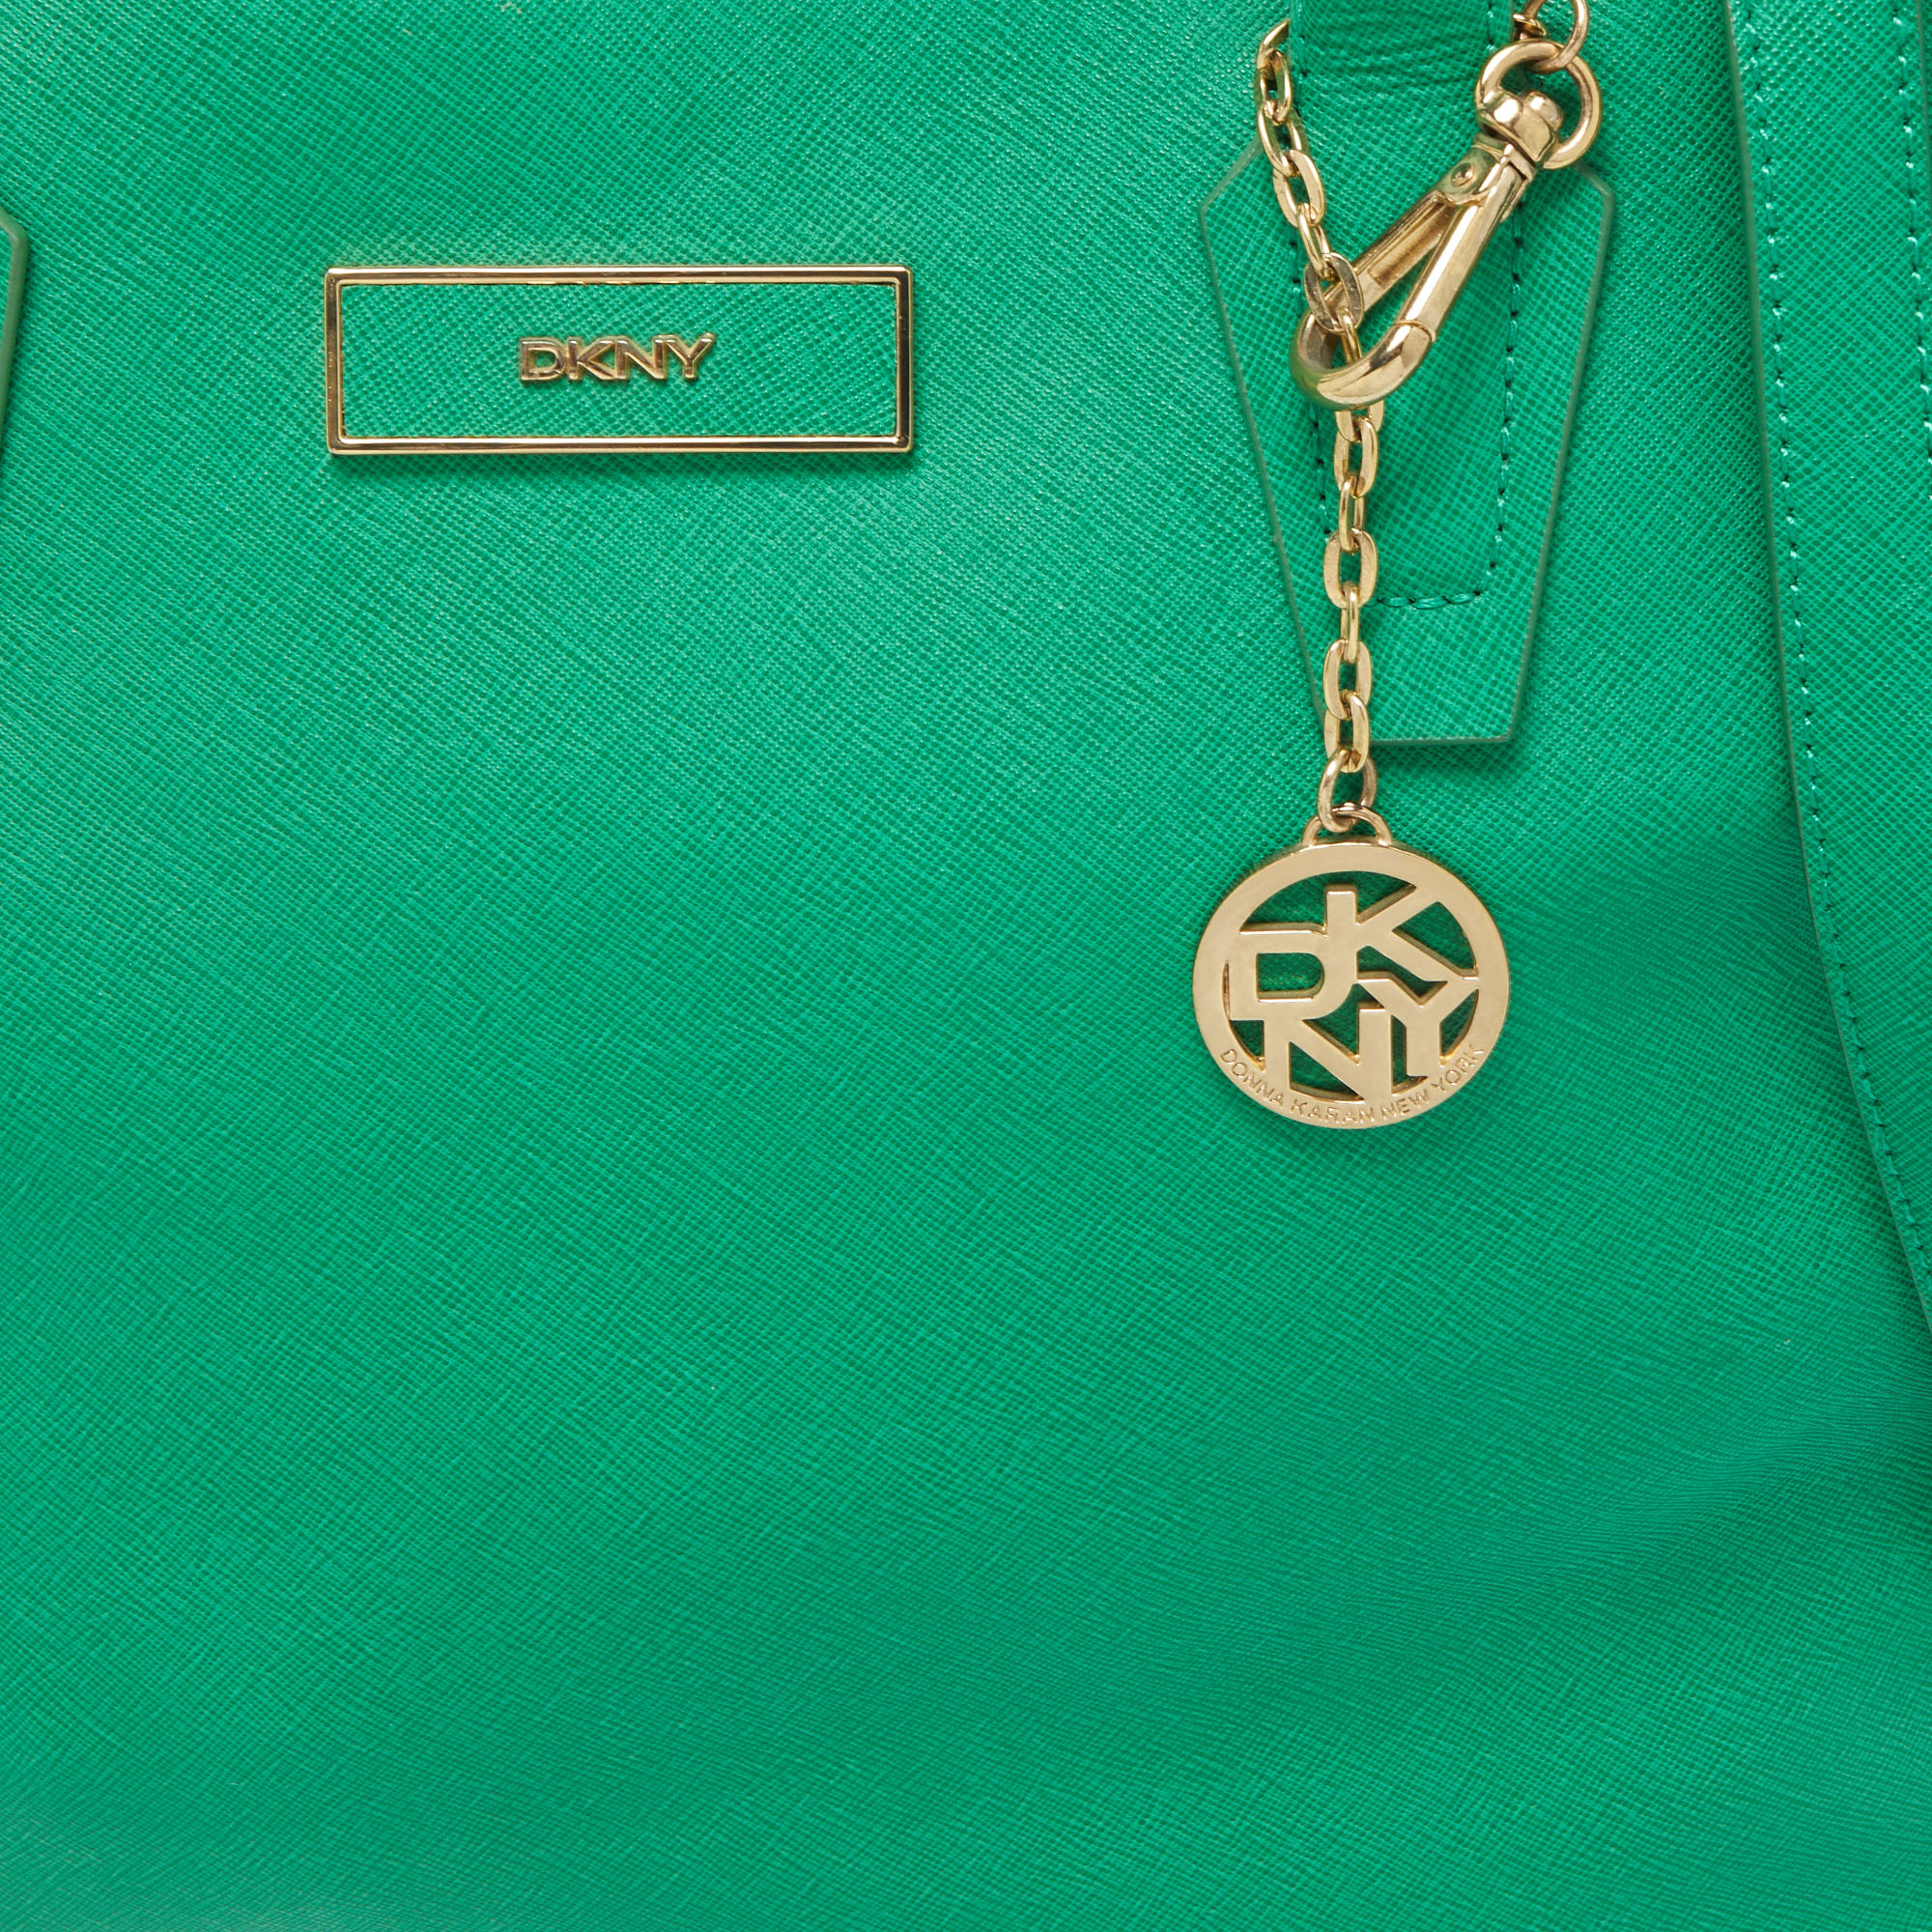 Dkny Green Leather Top Zip  Tote